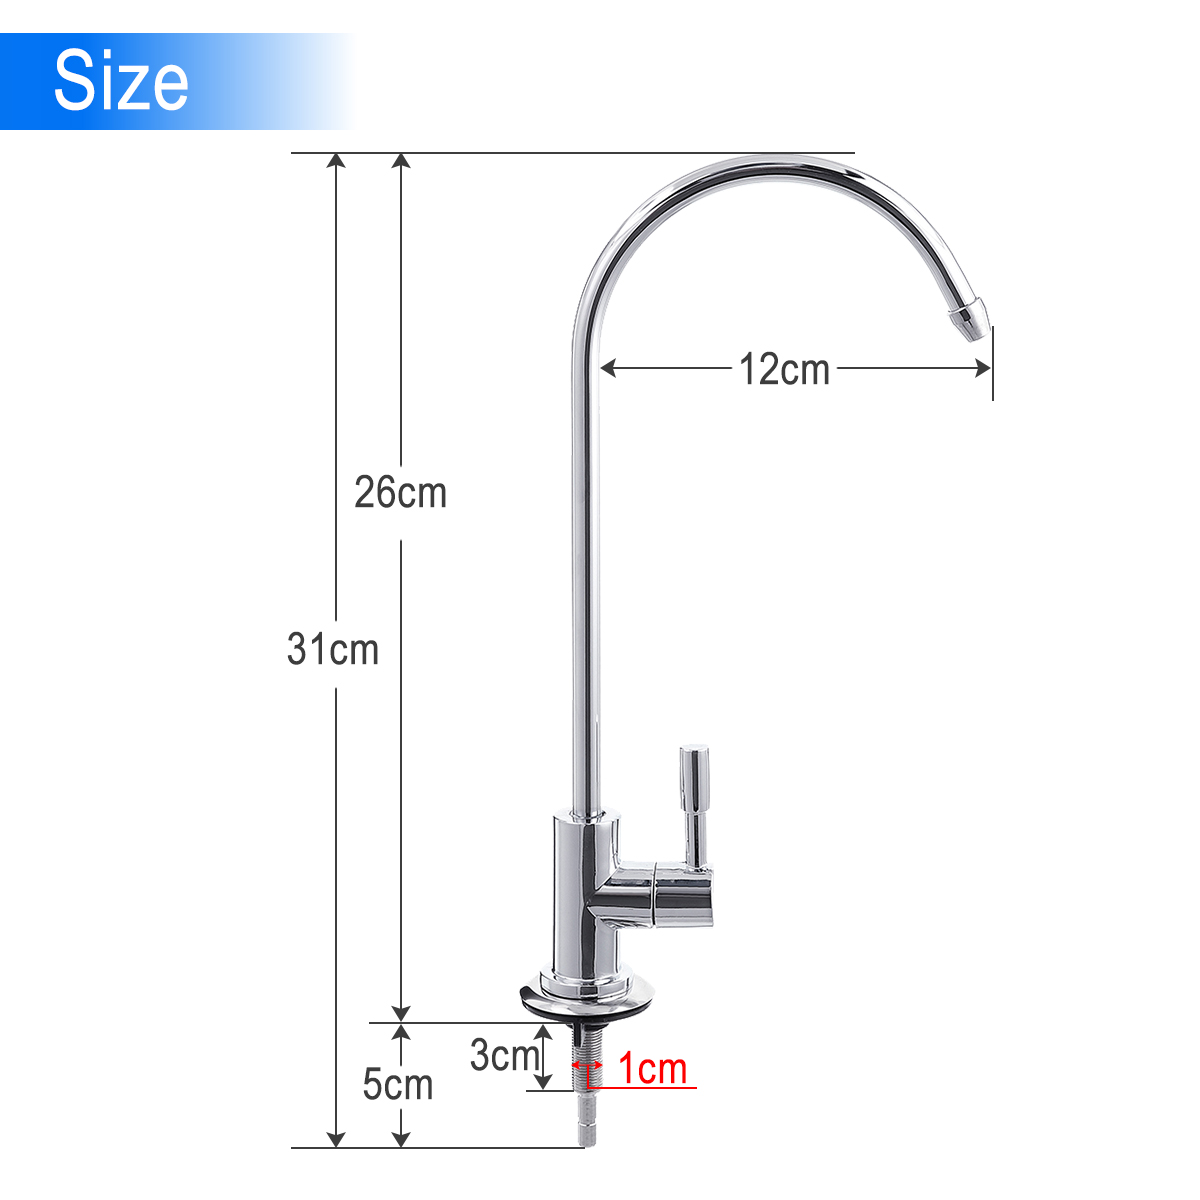 14-Inch-Chrome-Drinking-RO-Water-Filter-Faucet-Finish-Reverse-Osmosis-Sink-Kitchen-1257746